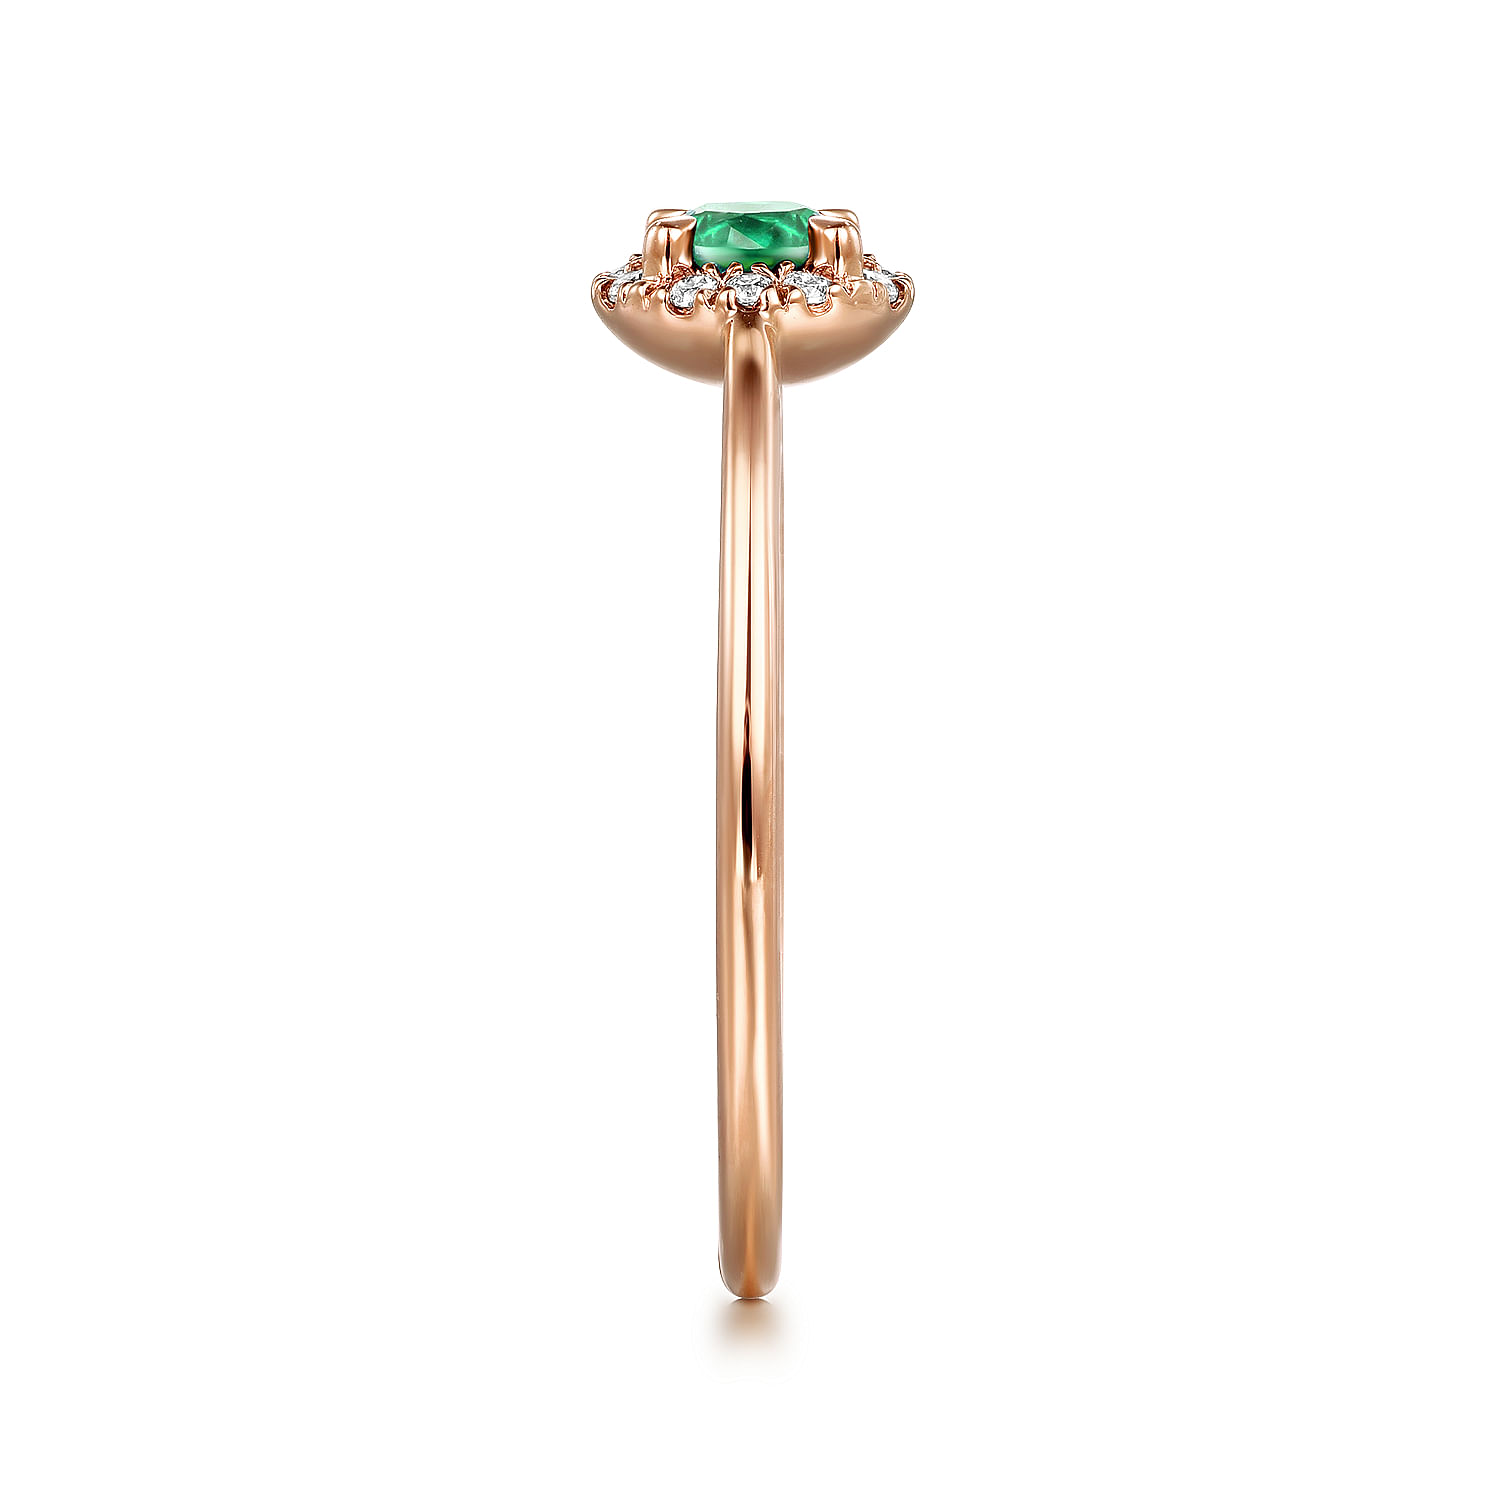 14K Rose Gold Emerald and Diamond Halo Promise Ring